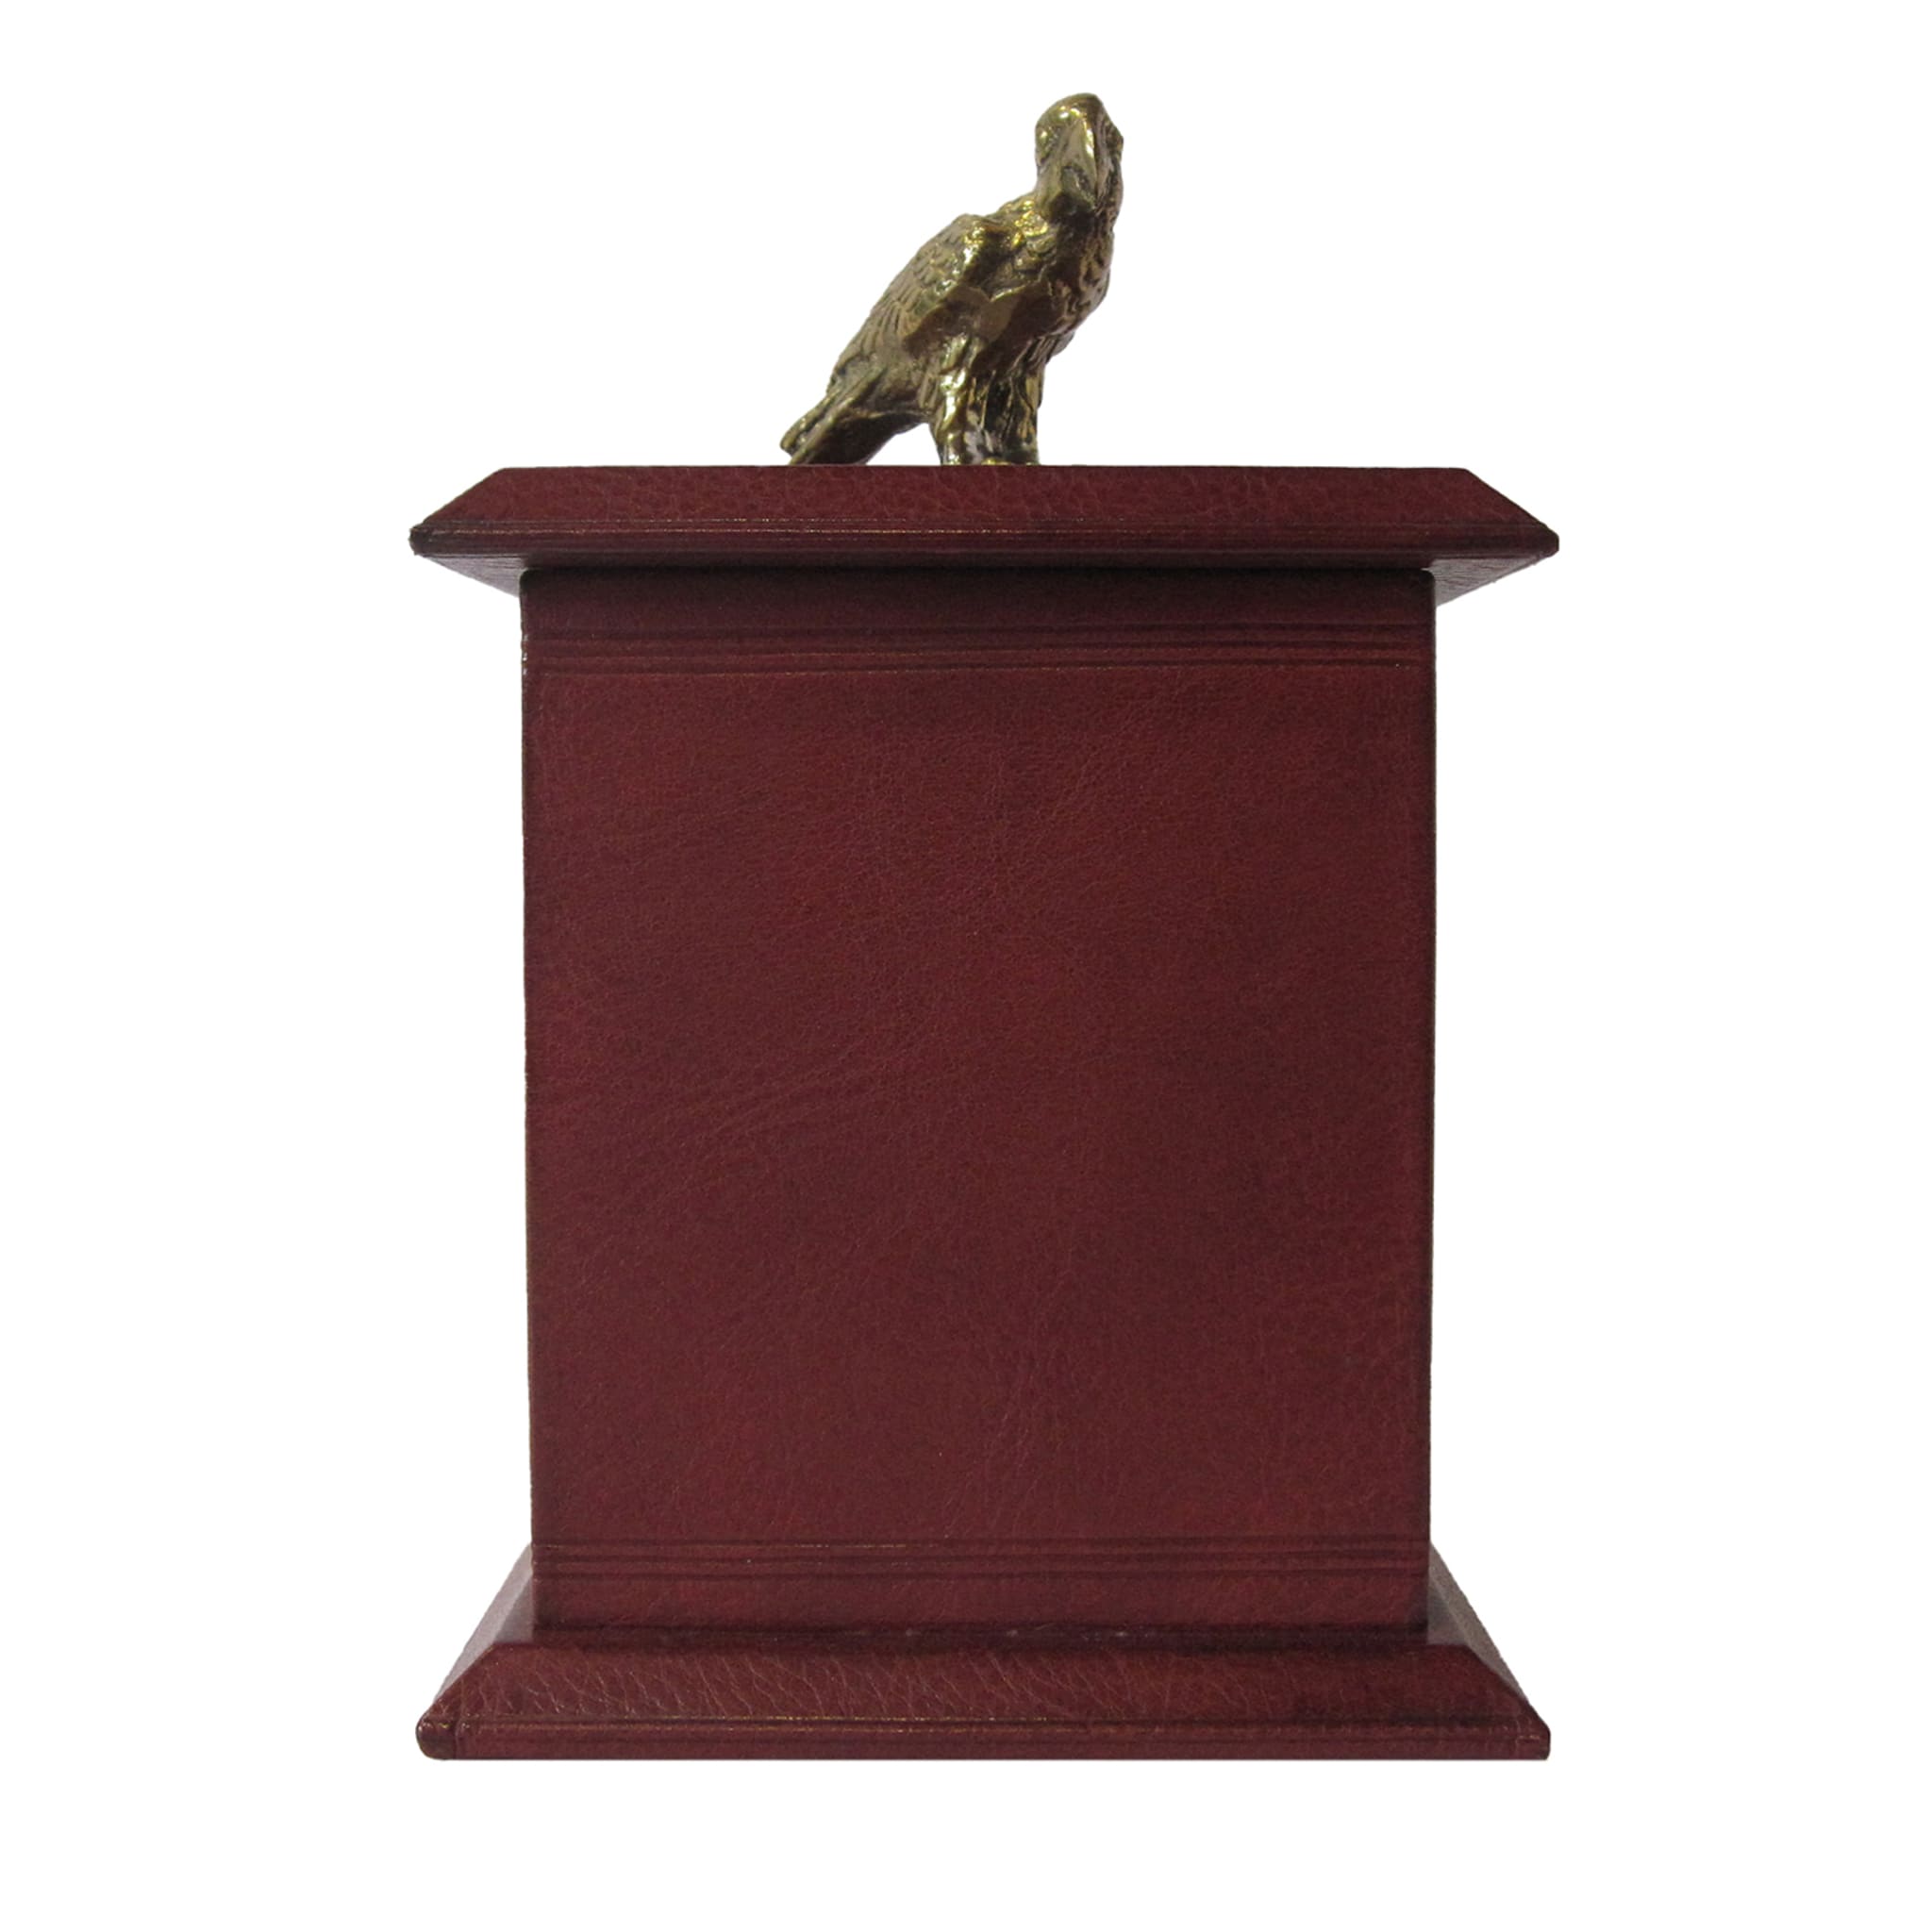 Bordeaux Leather Box with Brass Parrot - Main view